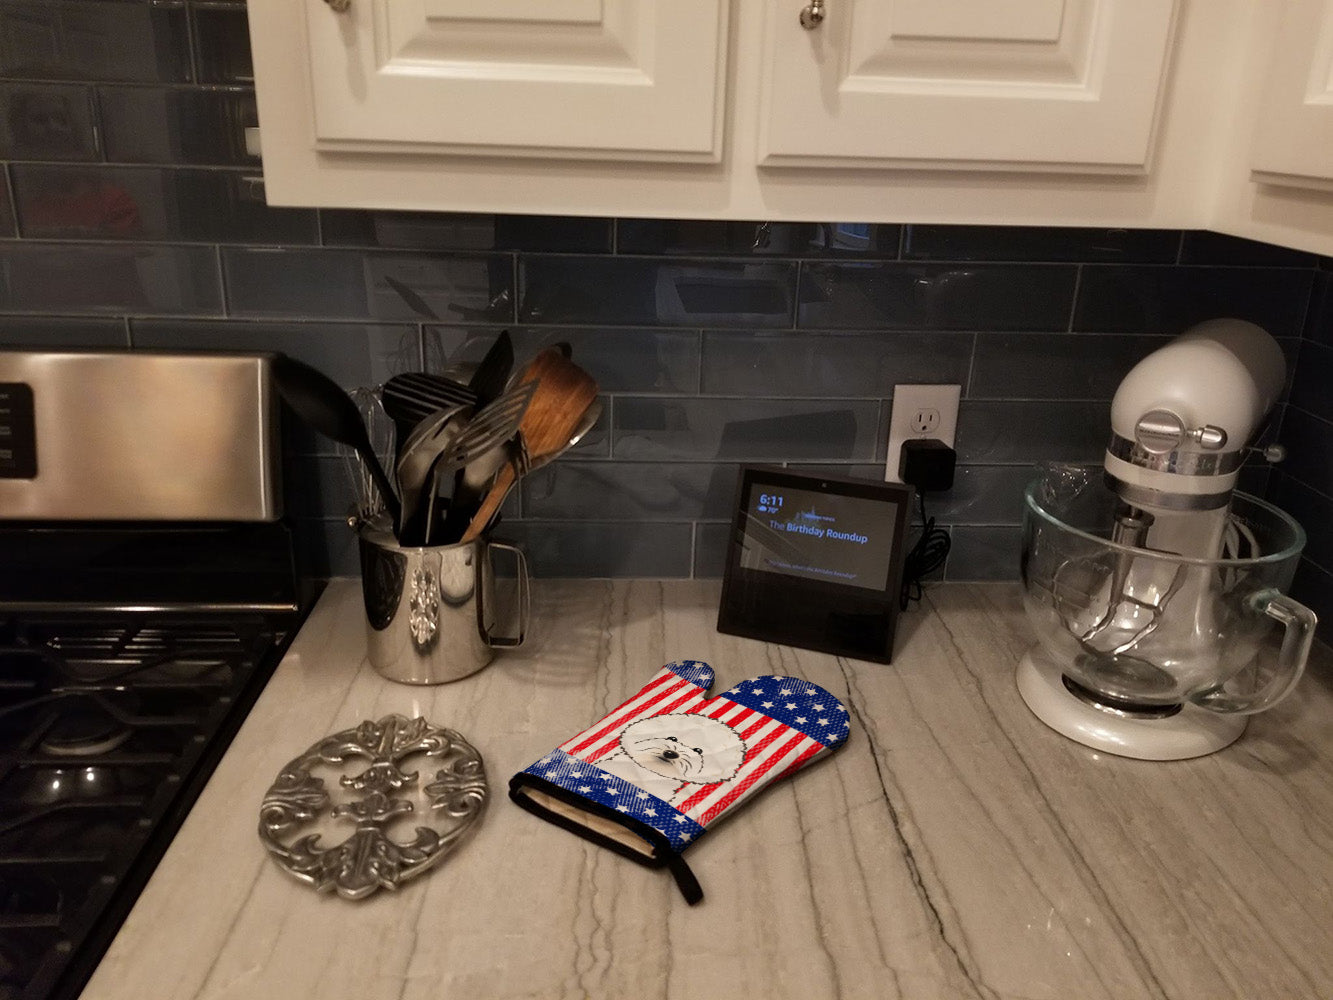 American Flag and Bichon Frise Oven Mitt BB2147OVMT  the-store.com.